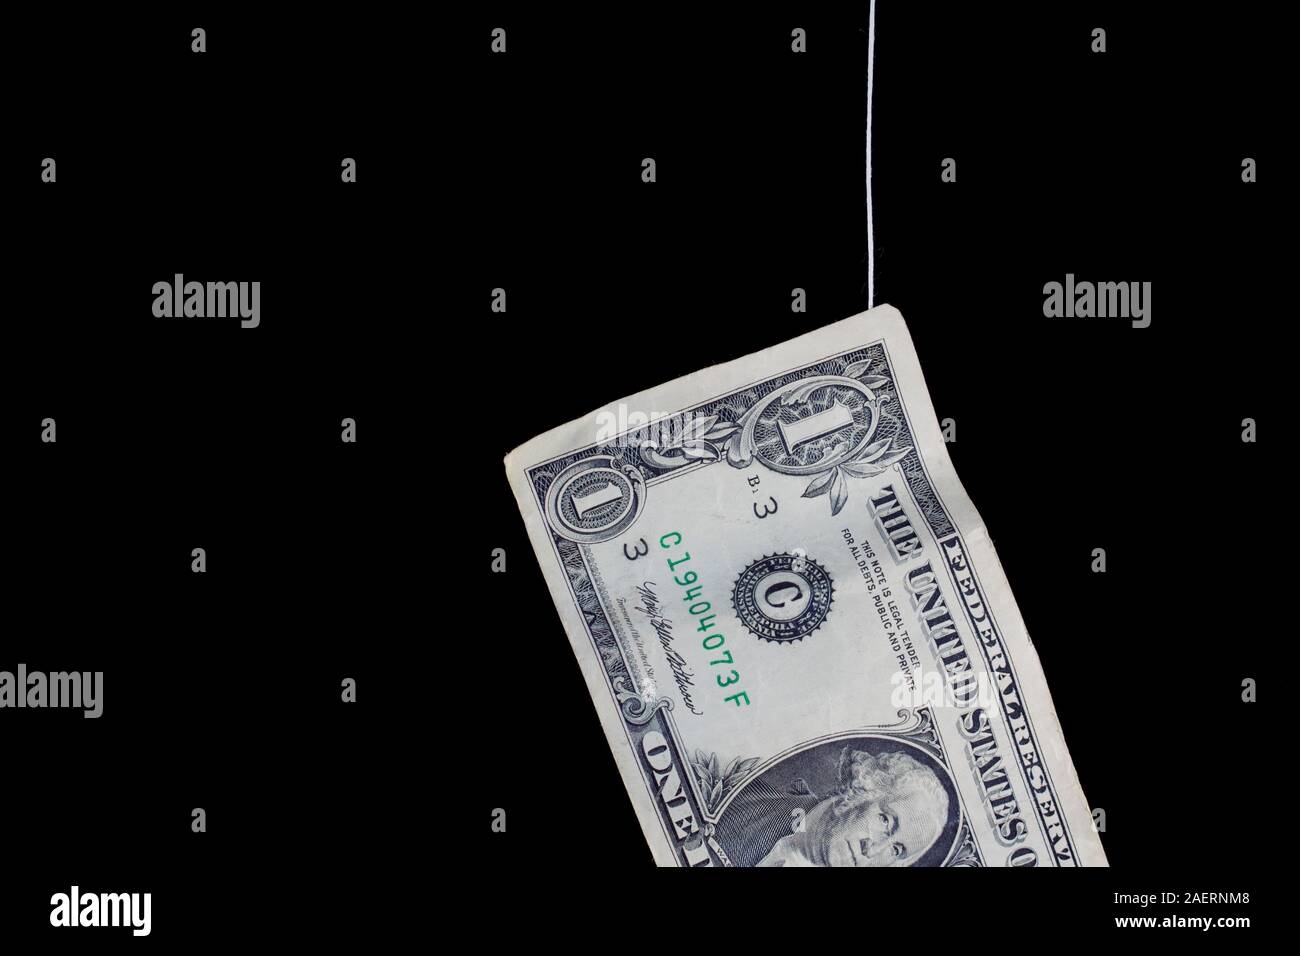 Money hanging on a thread, concept of risky financing, black background Stock Photo